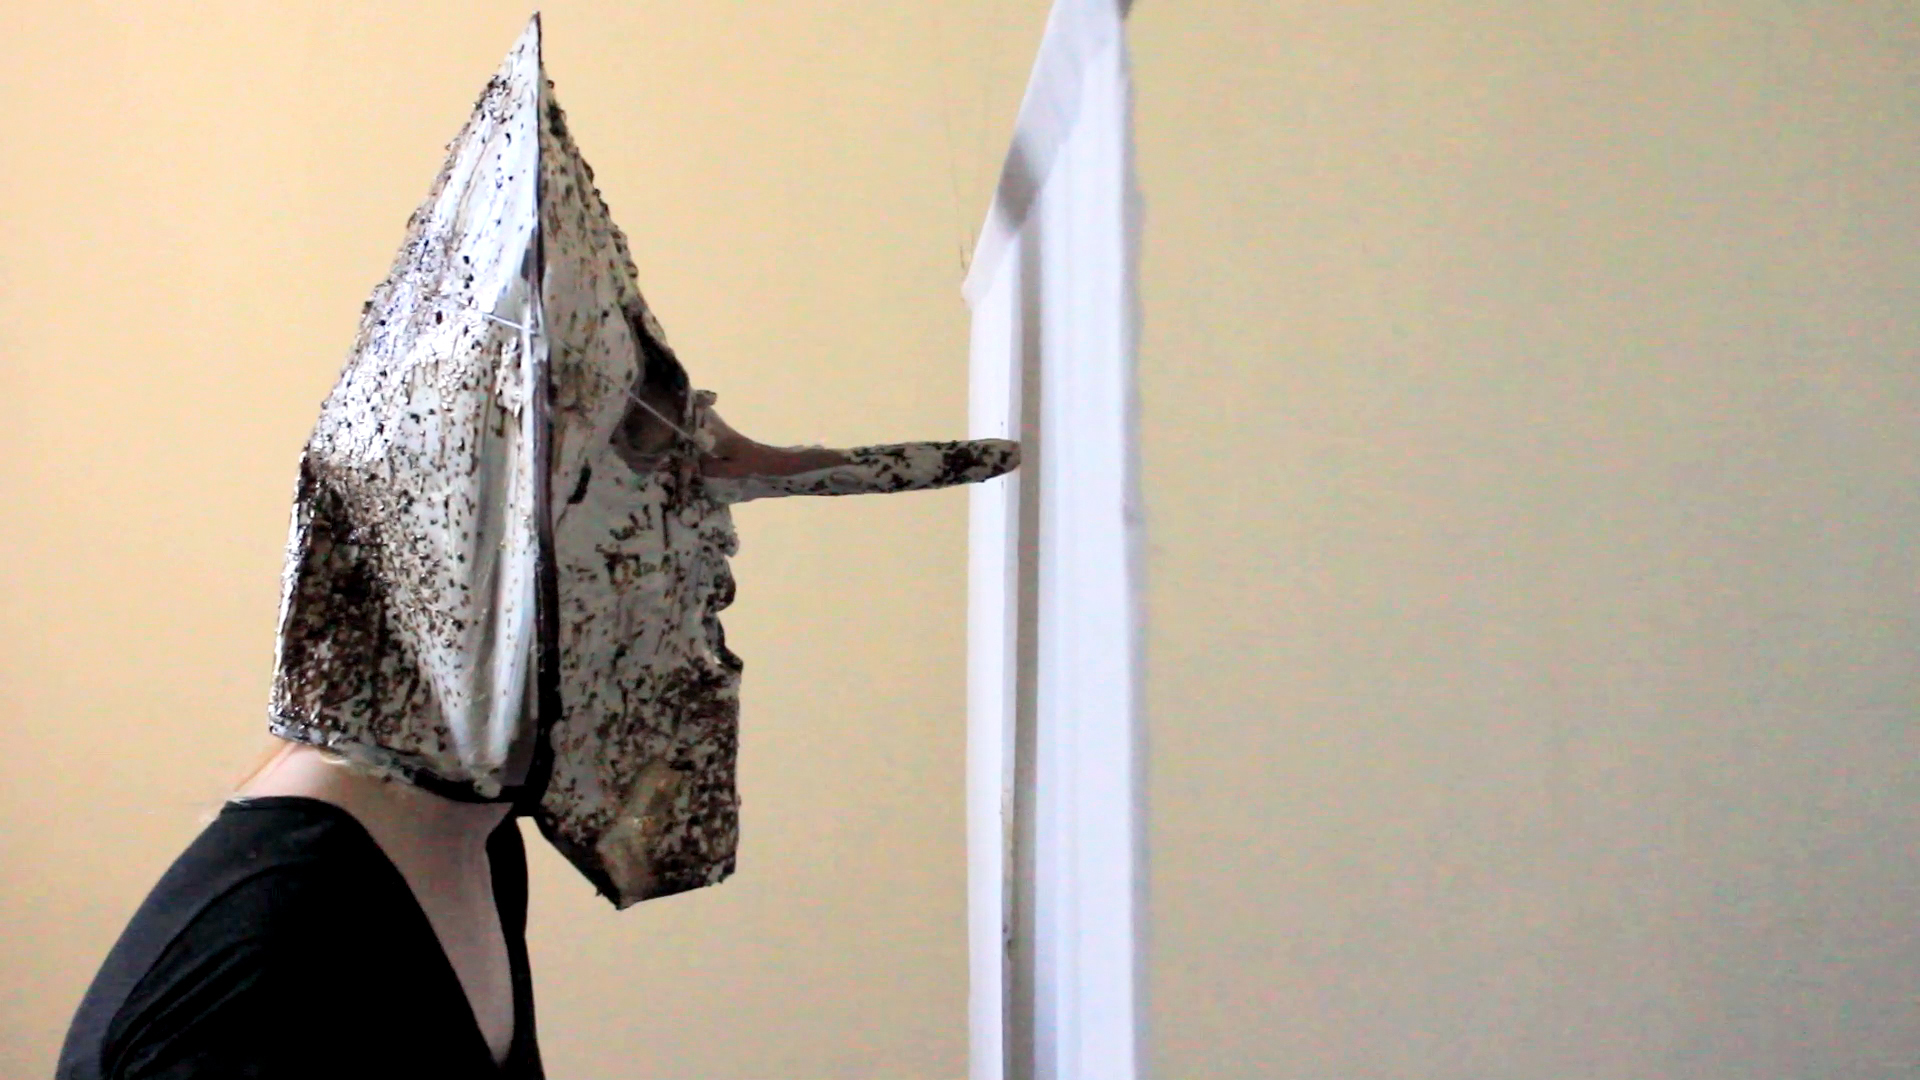 Briony Galligan, “Double nose painting”, 2015, video still, digital video, 3 minutes and 52 seconds 